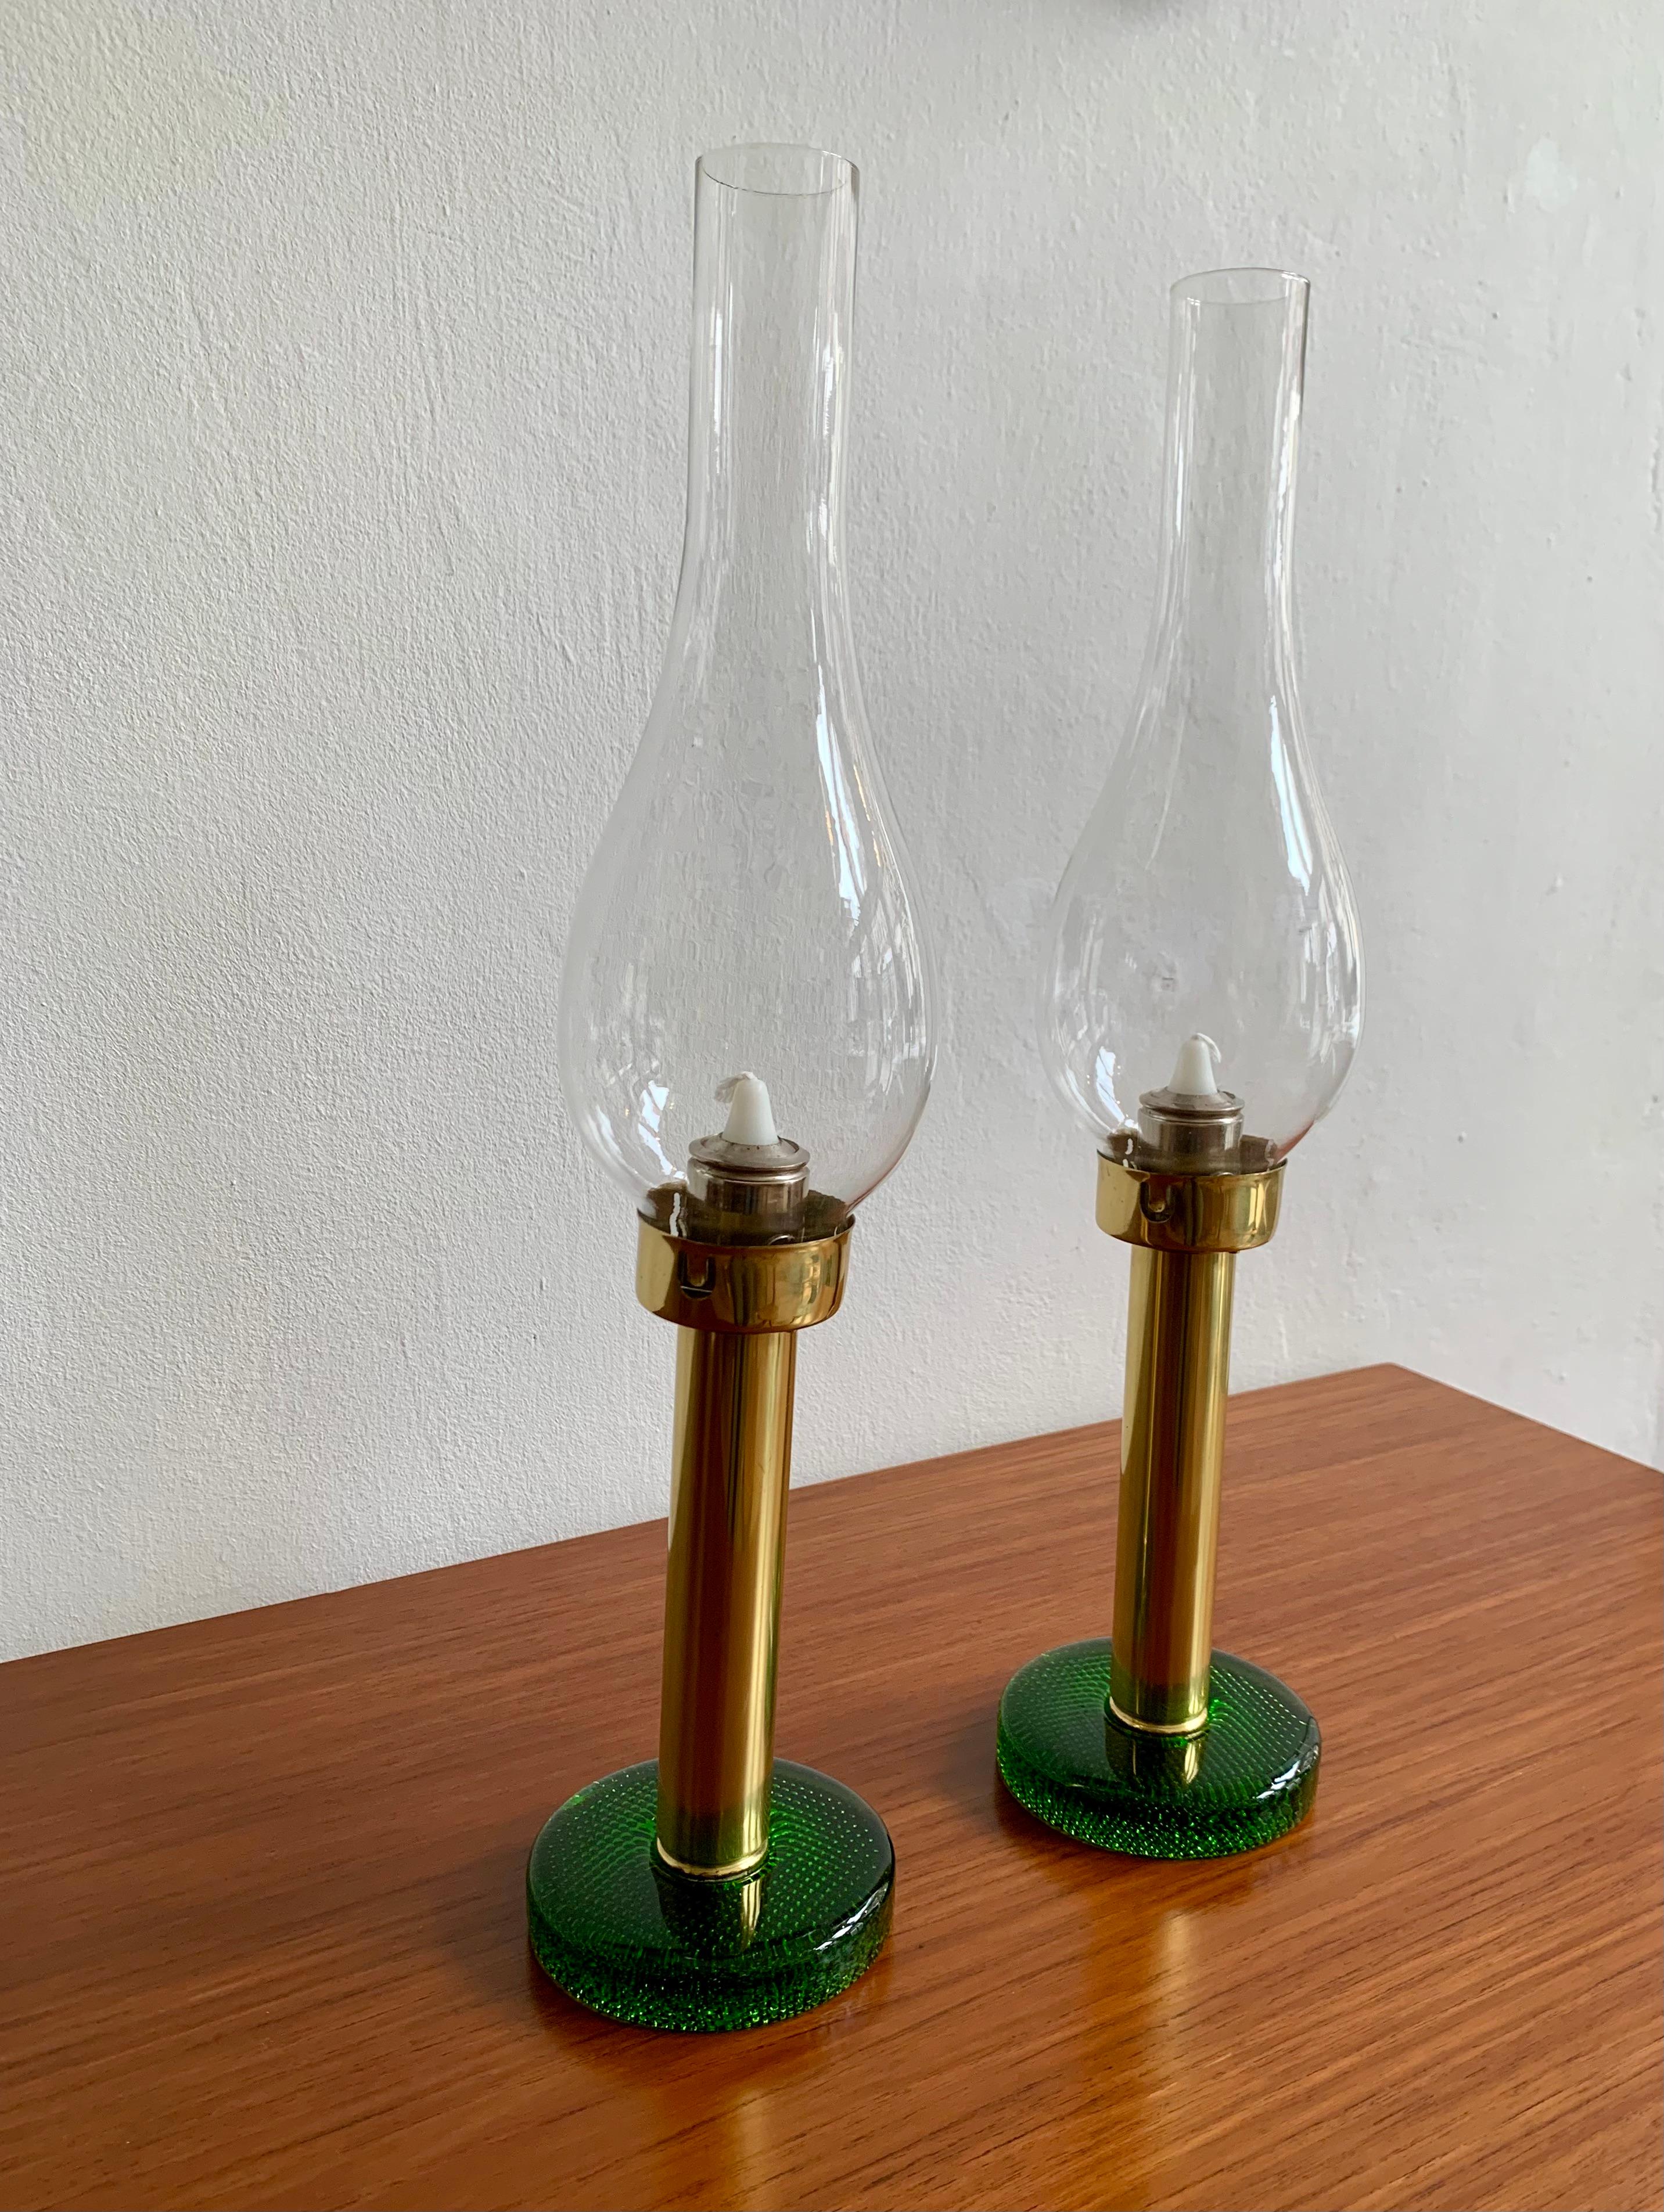 Brass Hurricane Candle Holder by Hans Agne Jakobsson - Pair Available  1